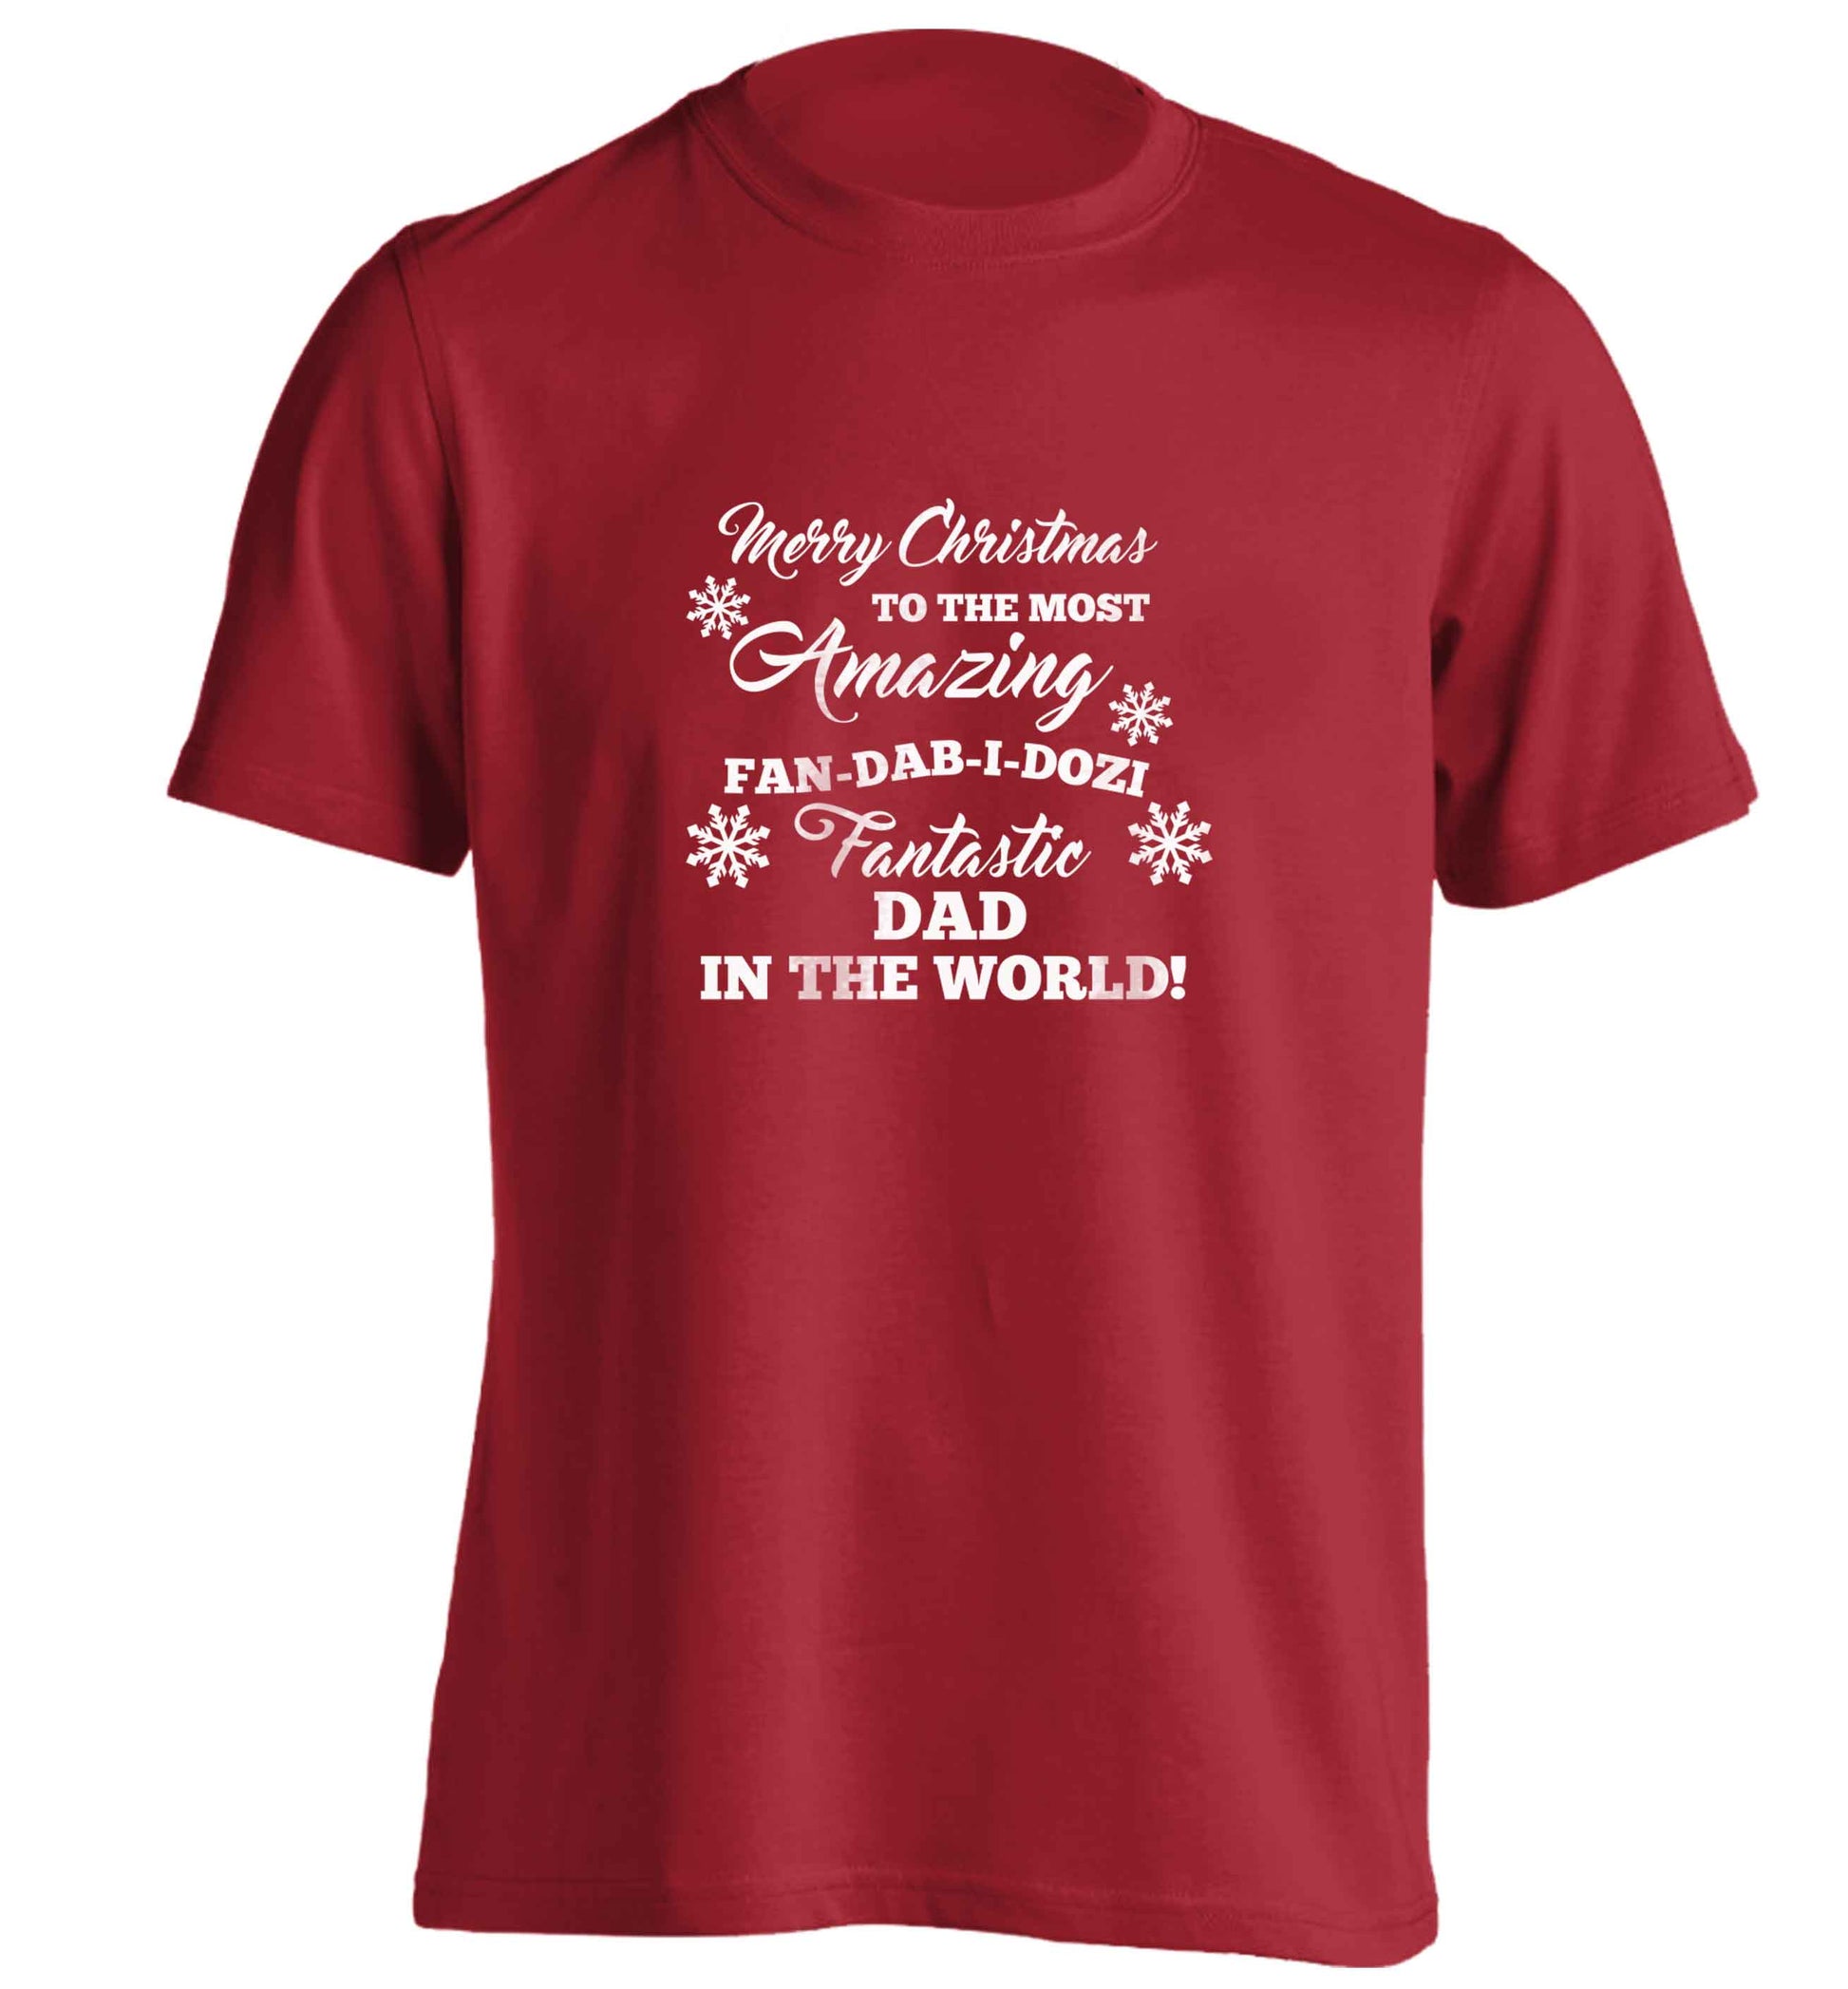 Merry Christmas to the most amazing fan-dab-i-dozi fantasic Dad in the world adults unisex red Tshirt 2XL